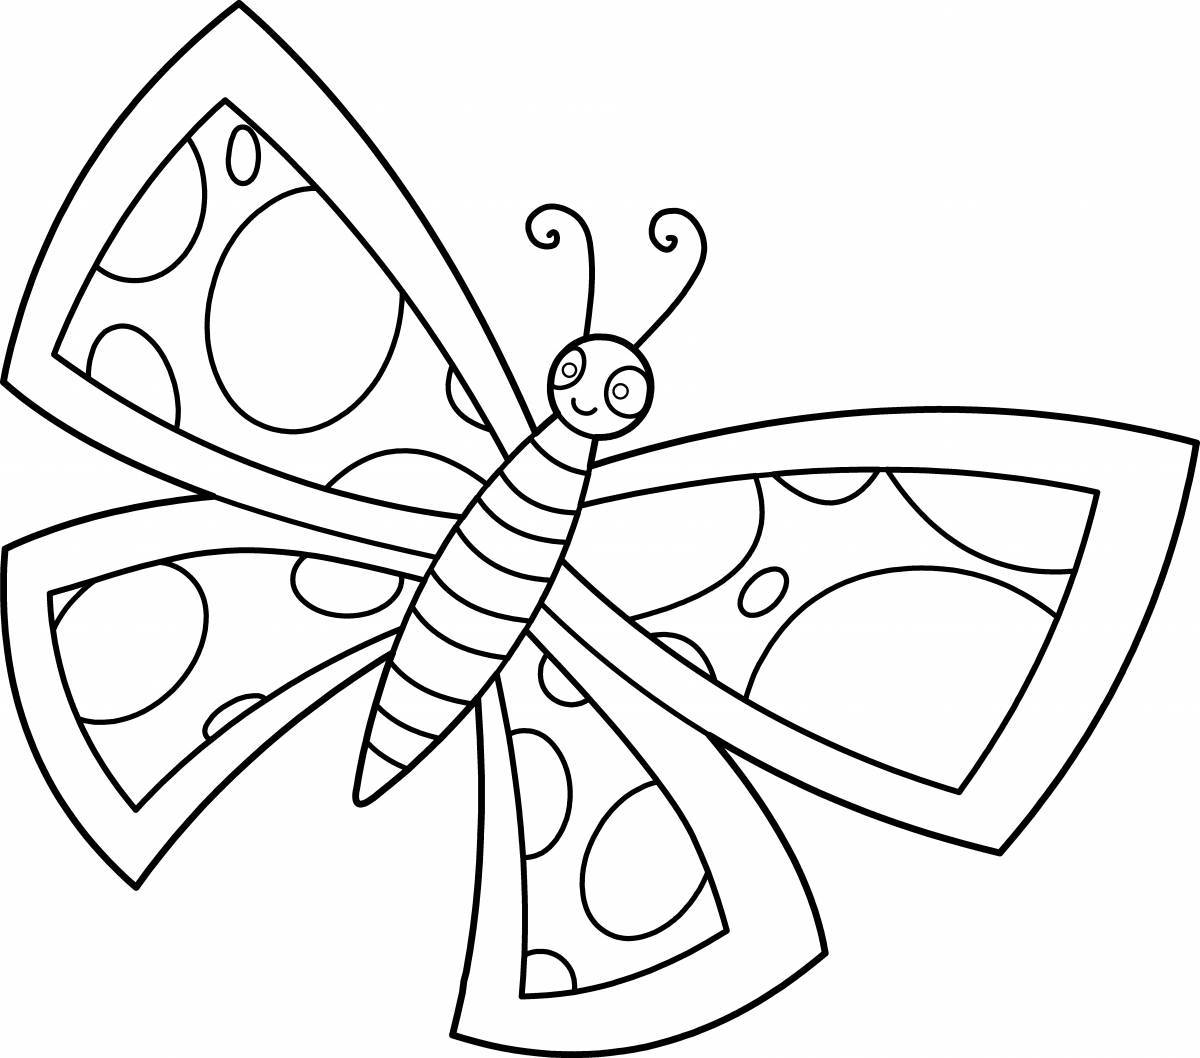 Colorific butterfly coloring page for 3-4 year olds